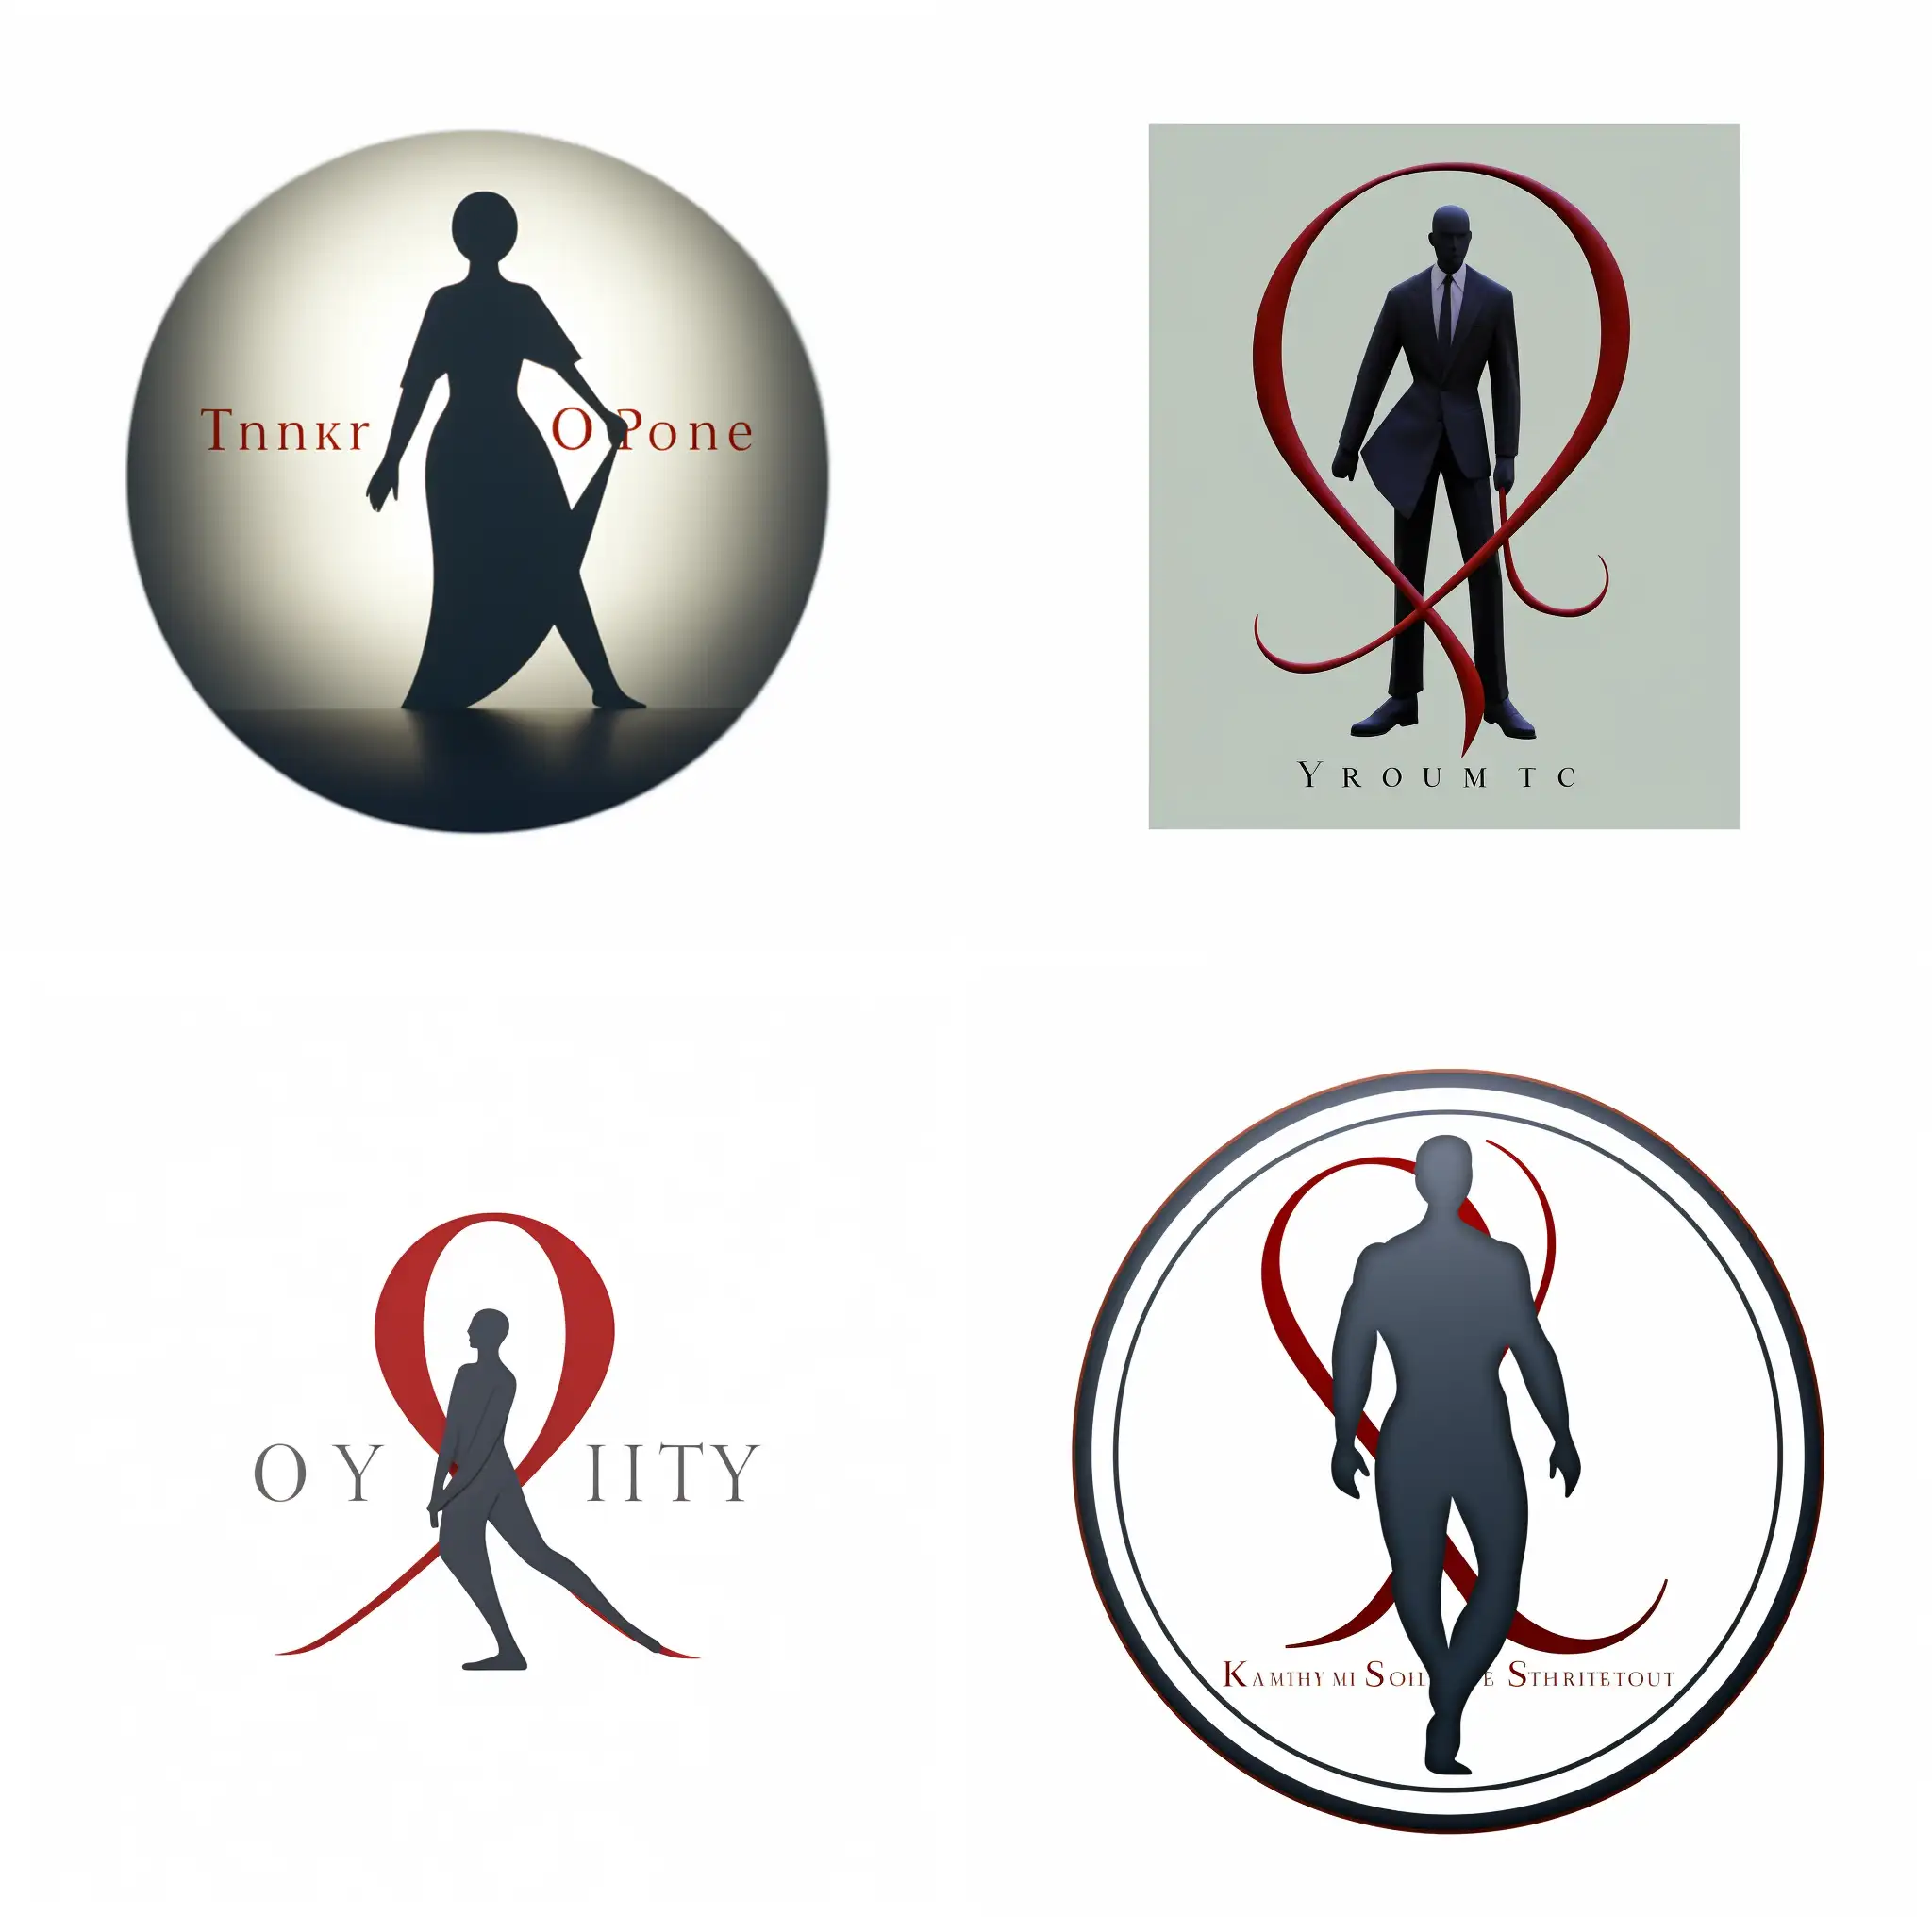 (Simon Oxley style logo), shadows, (The figure consists of a round head with ears that form its body), (clear shapes), animated, (professionalism and quality), (give depth and realism), (hybrid look), graceful